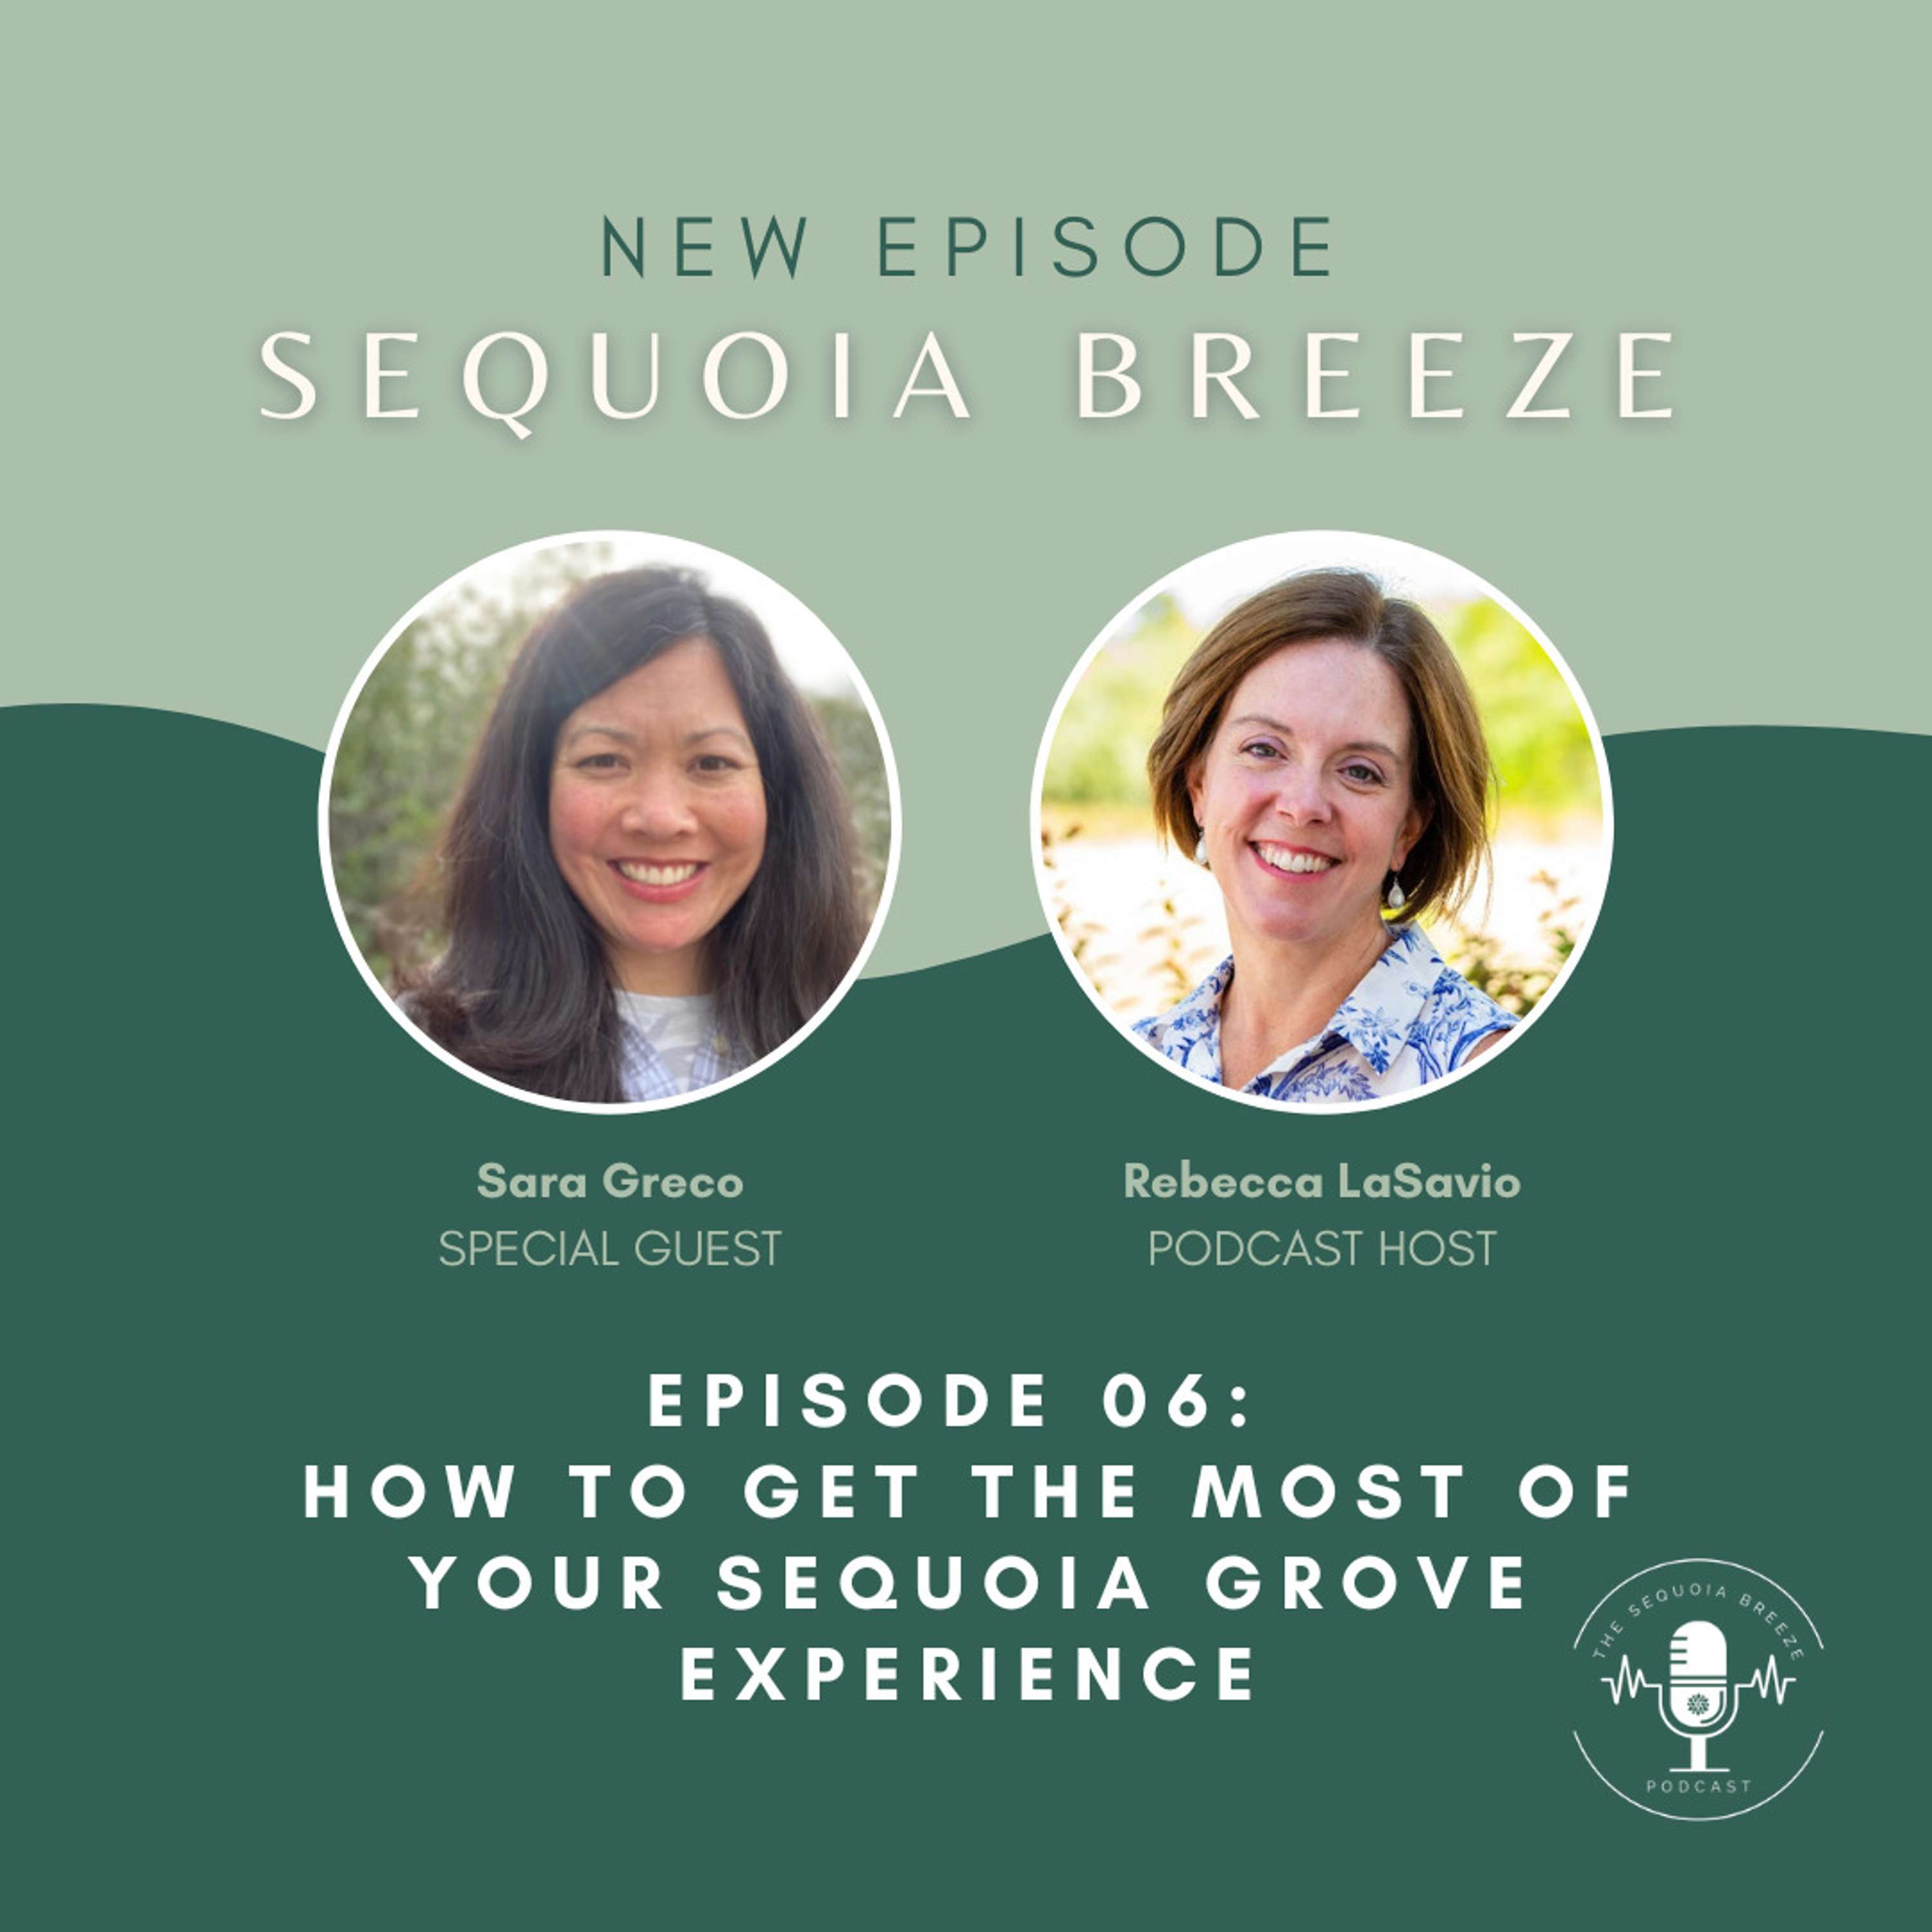 Getting the Most out of your Sequoia Grove Experience